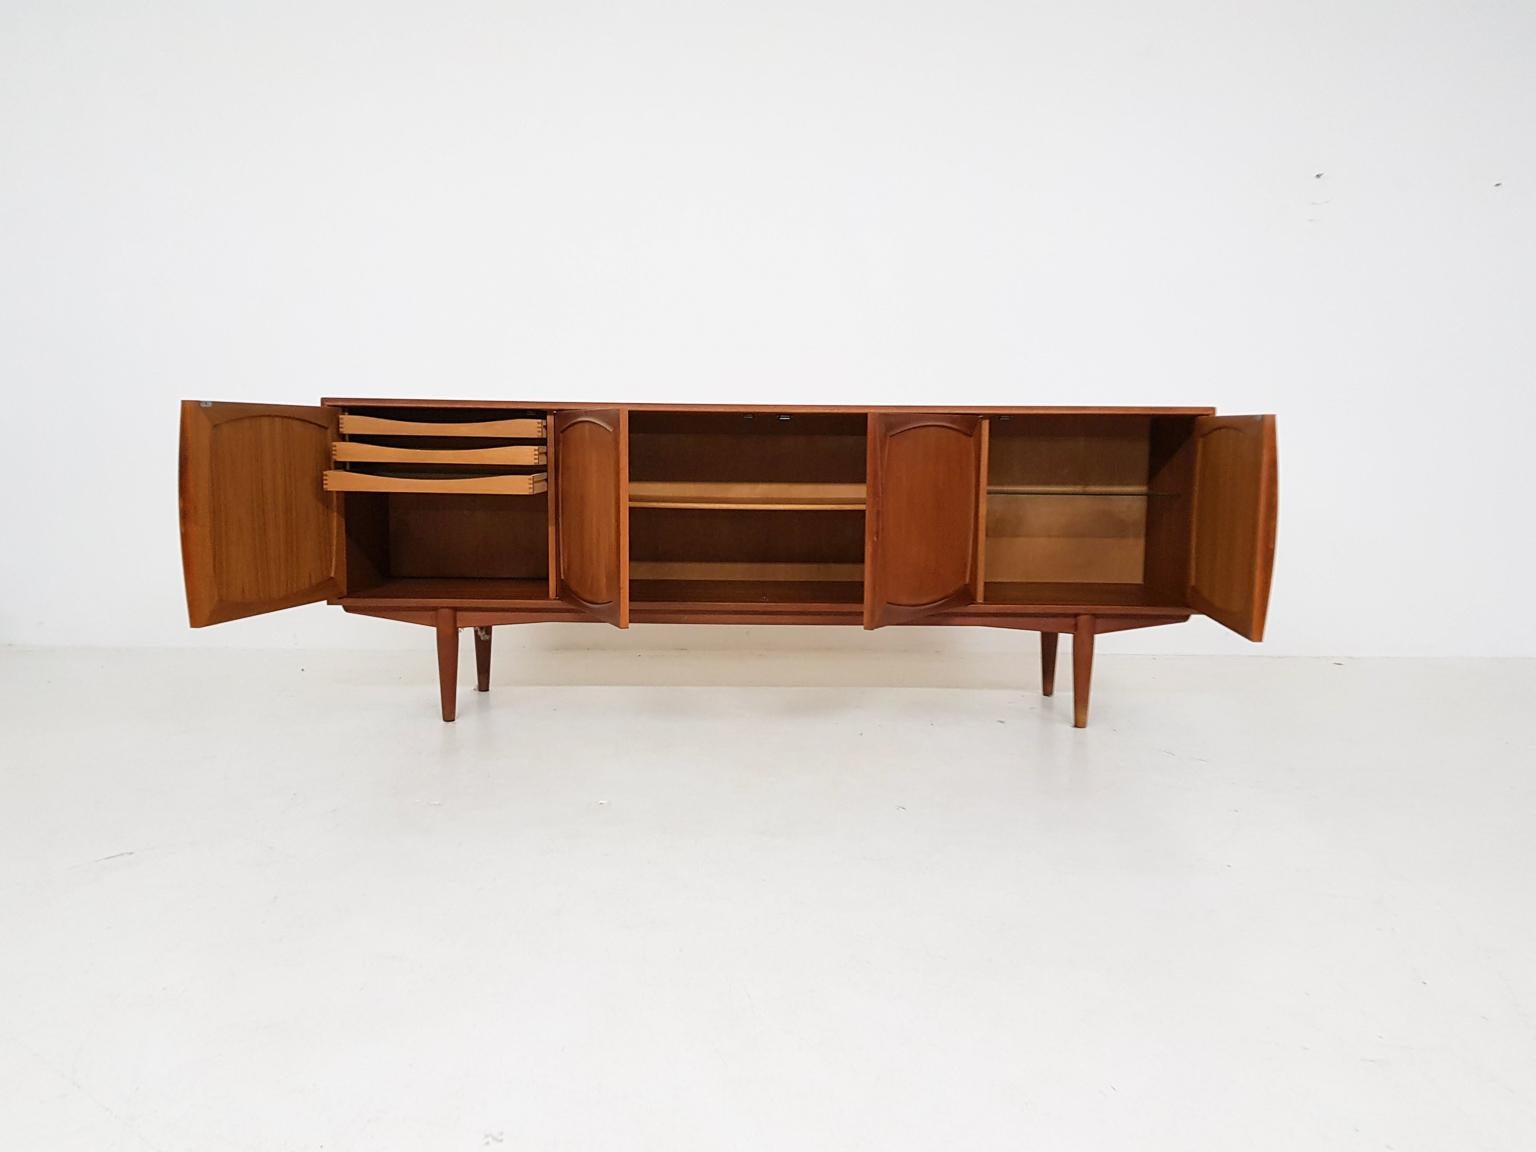 Scandinavian Modern teak credenza or sideboard by Adolf Relling & Rolf Rastad for Bahus, Norway 1960s.

This Scandinavian Modern sideboard form Norway is entirely made of teak. It has 4 doors with beautiful solid teak inlays. Inside the cabinet